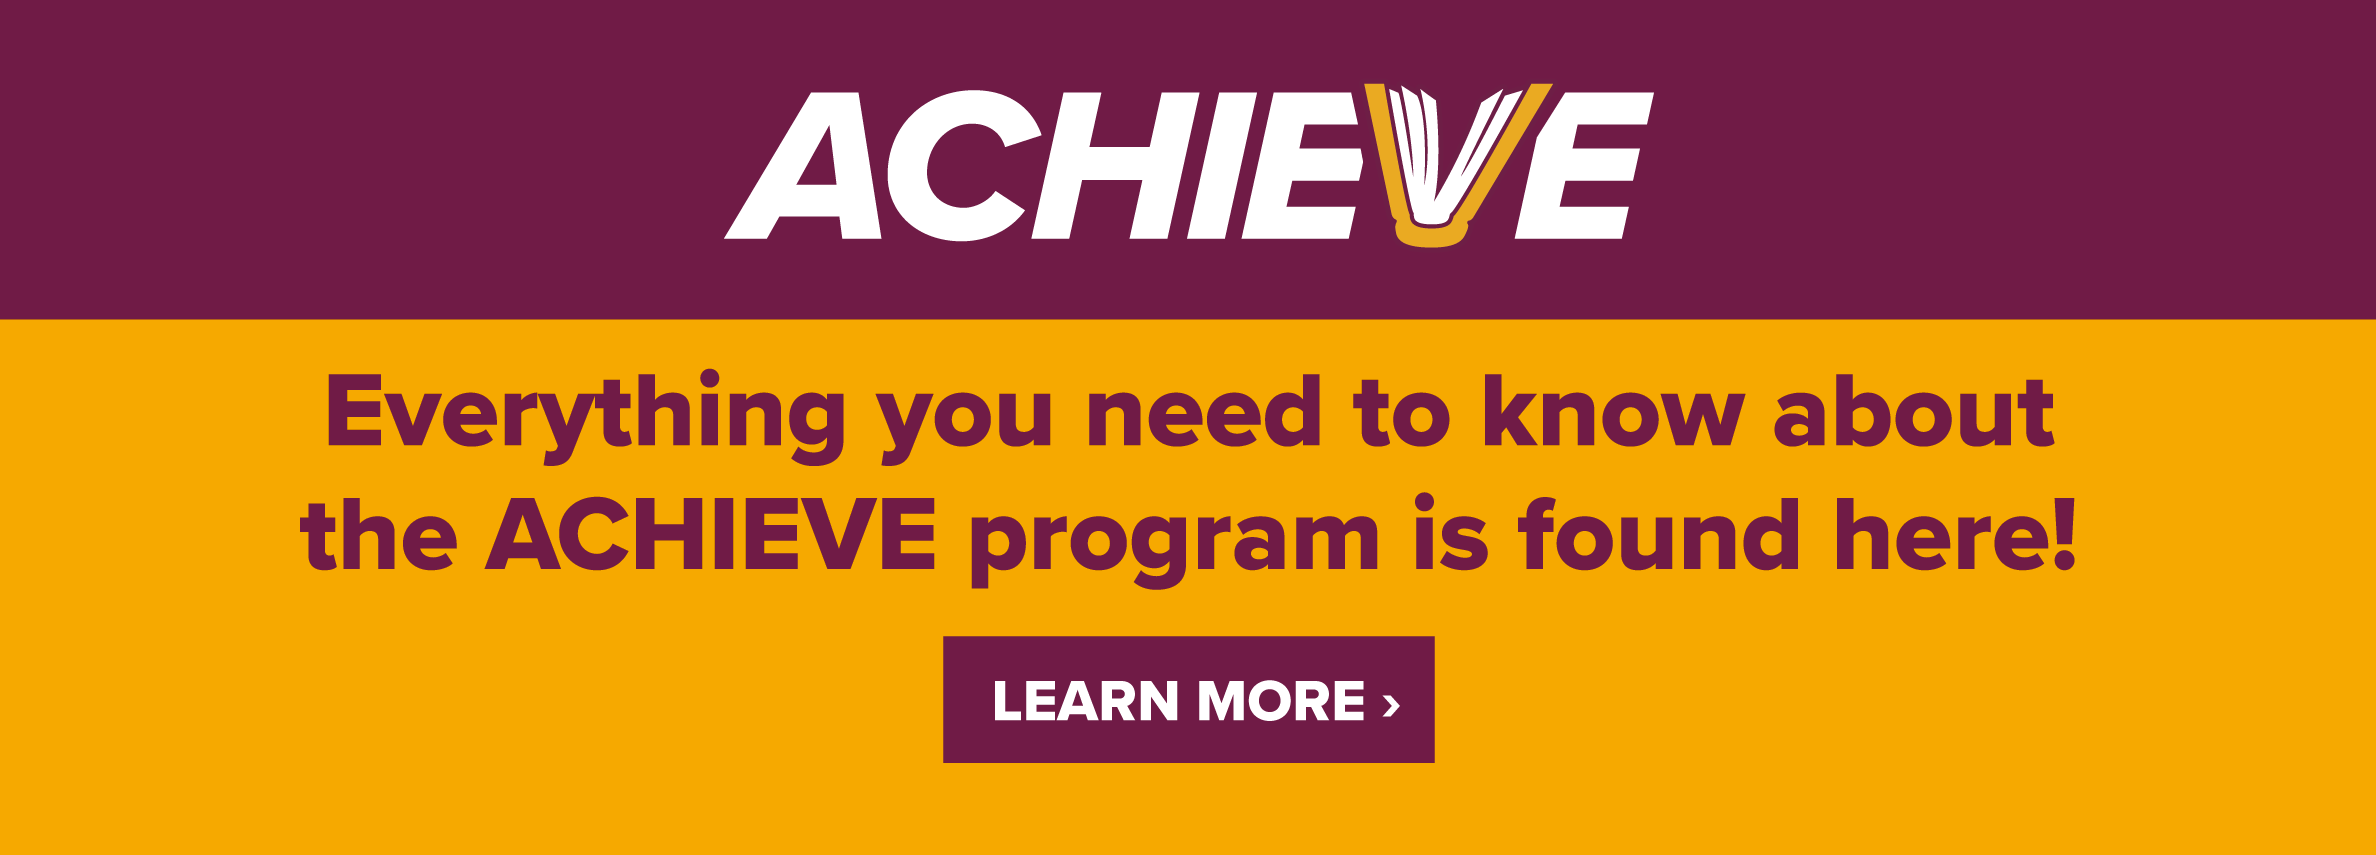 Achieve. Everything you need to know about the ACHIEVE program is found here! LEARN MORE> (new tab)